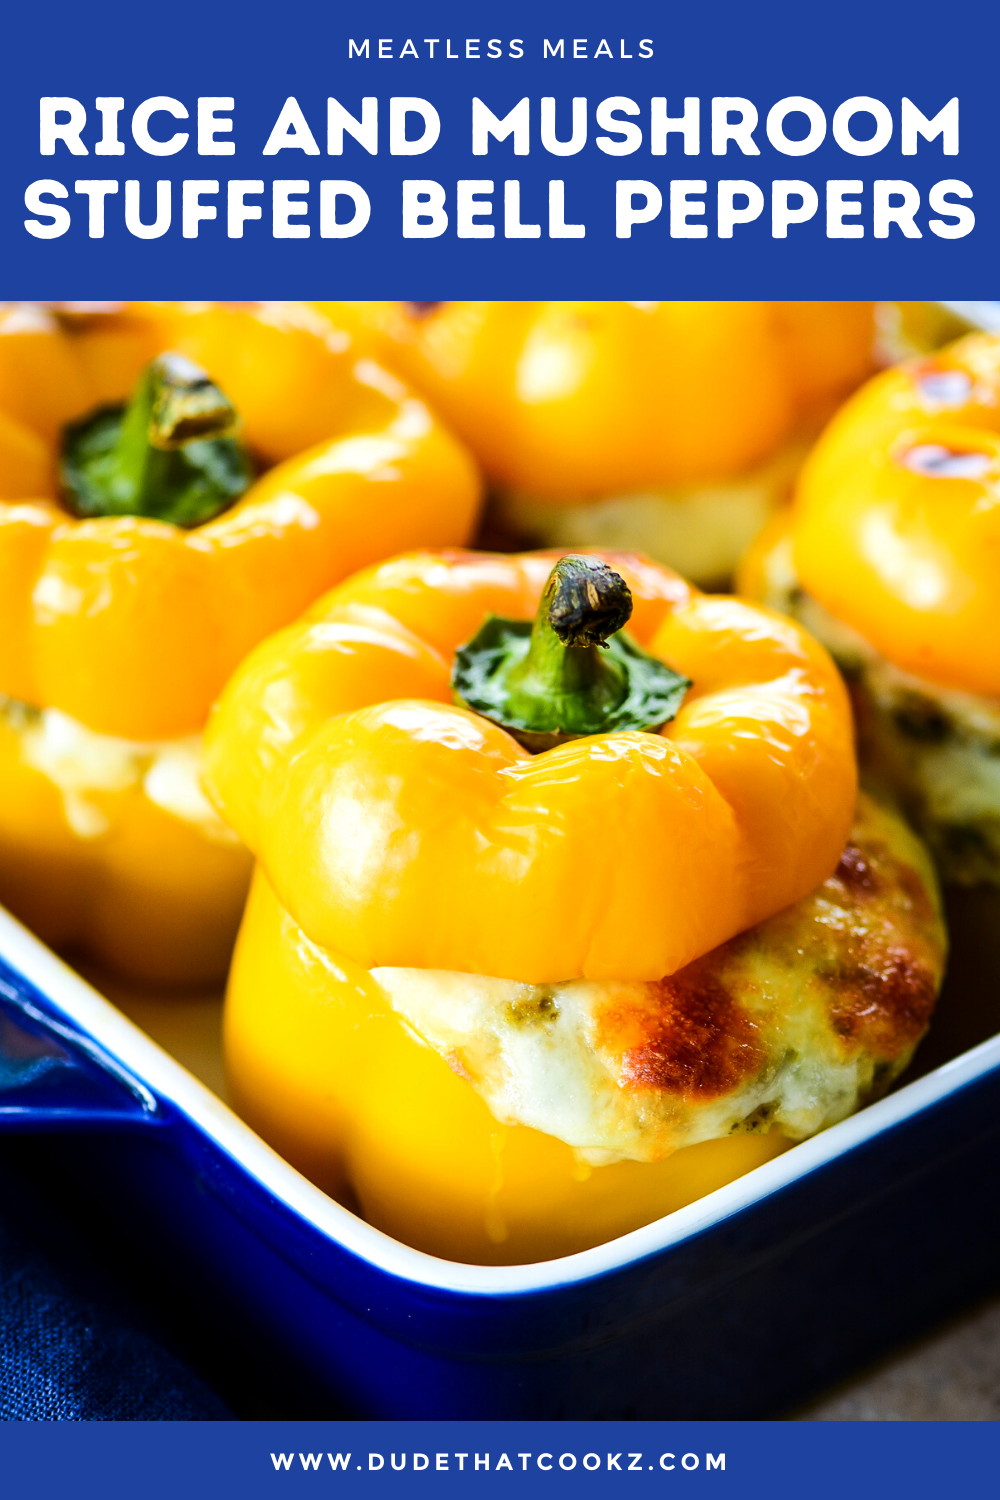 Rice and Mushroom Stuffed Bell Peppers